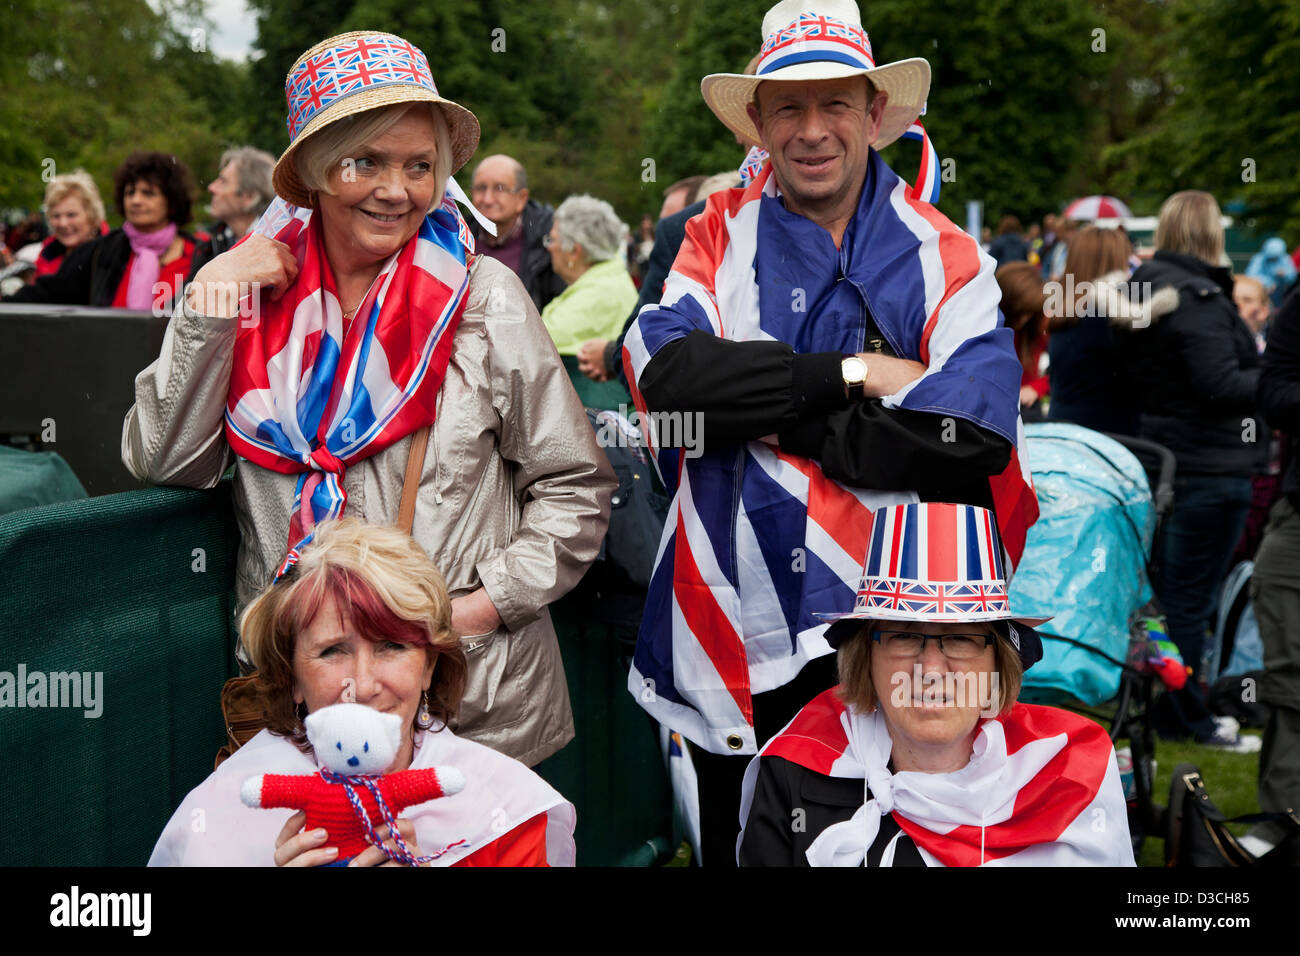 People dressed up for the Queen's Jubilee celebrations in St James' Park, London Stock Photo